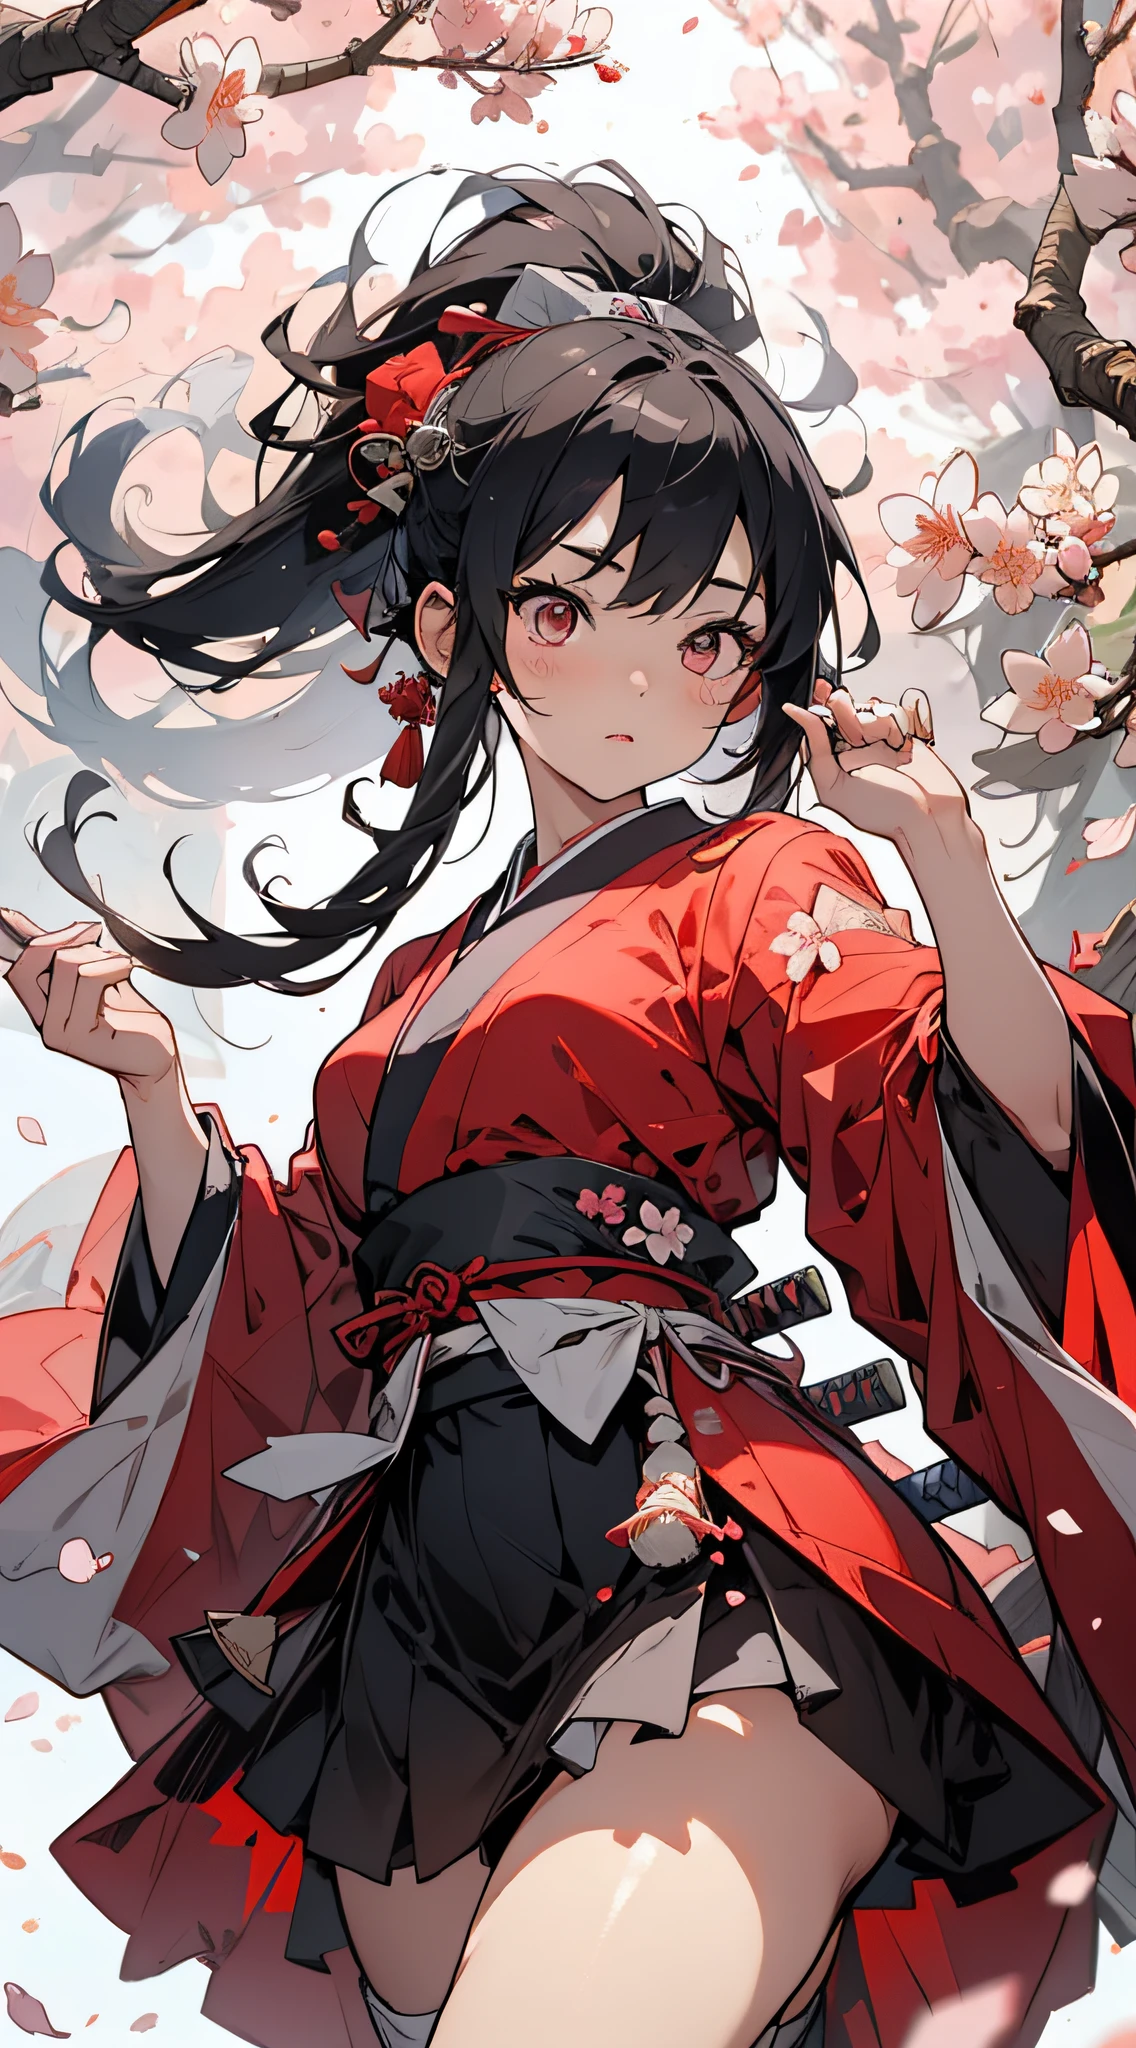 Masterpiece, super high resolution, perfect picture quality, ink style, chivalrous girl, red Japanese costume, holding a Japanese sword, dancing, cherry blossoms falling, petals flying, silver bells jingling, fascinating.